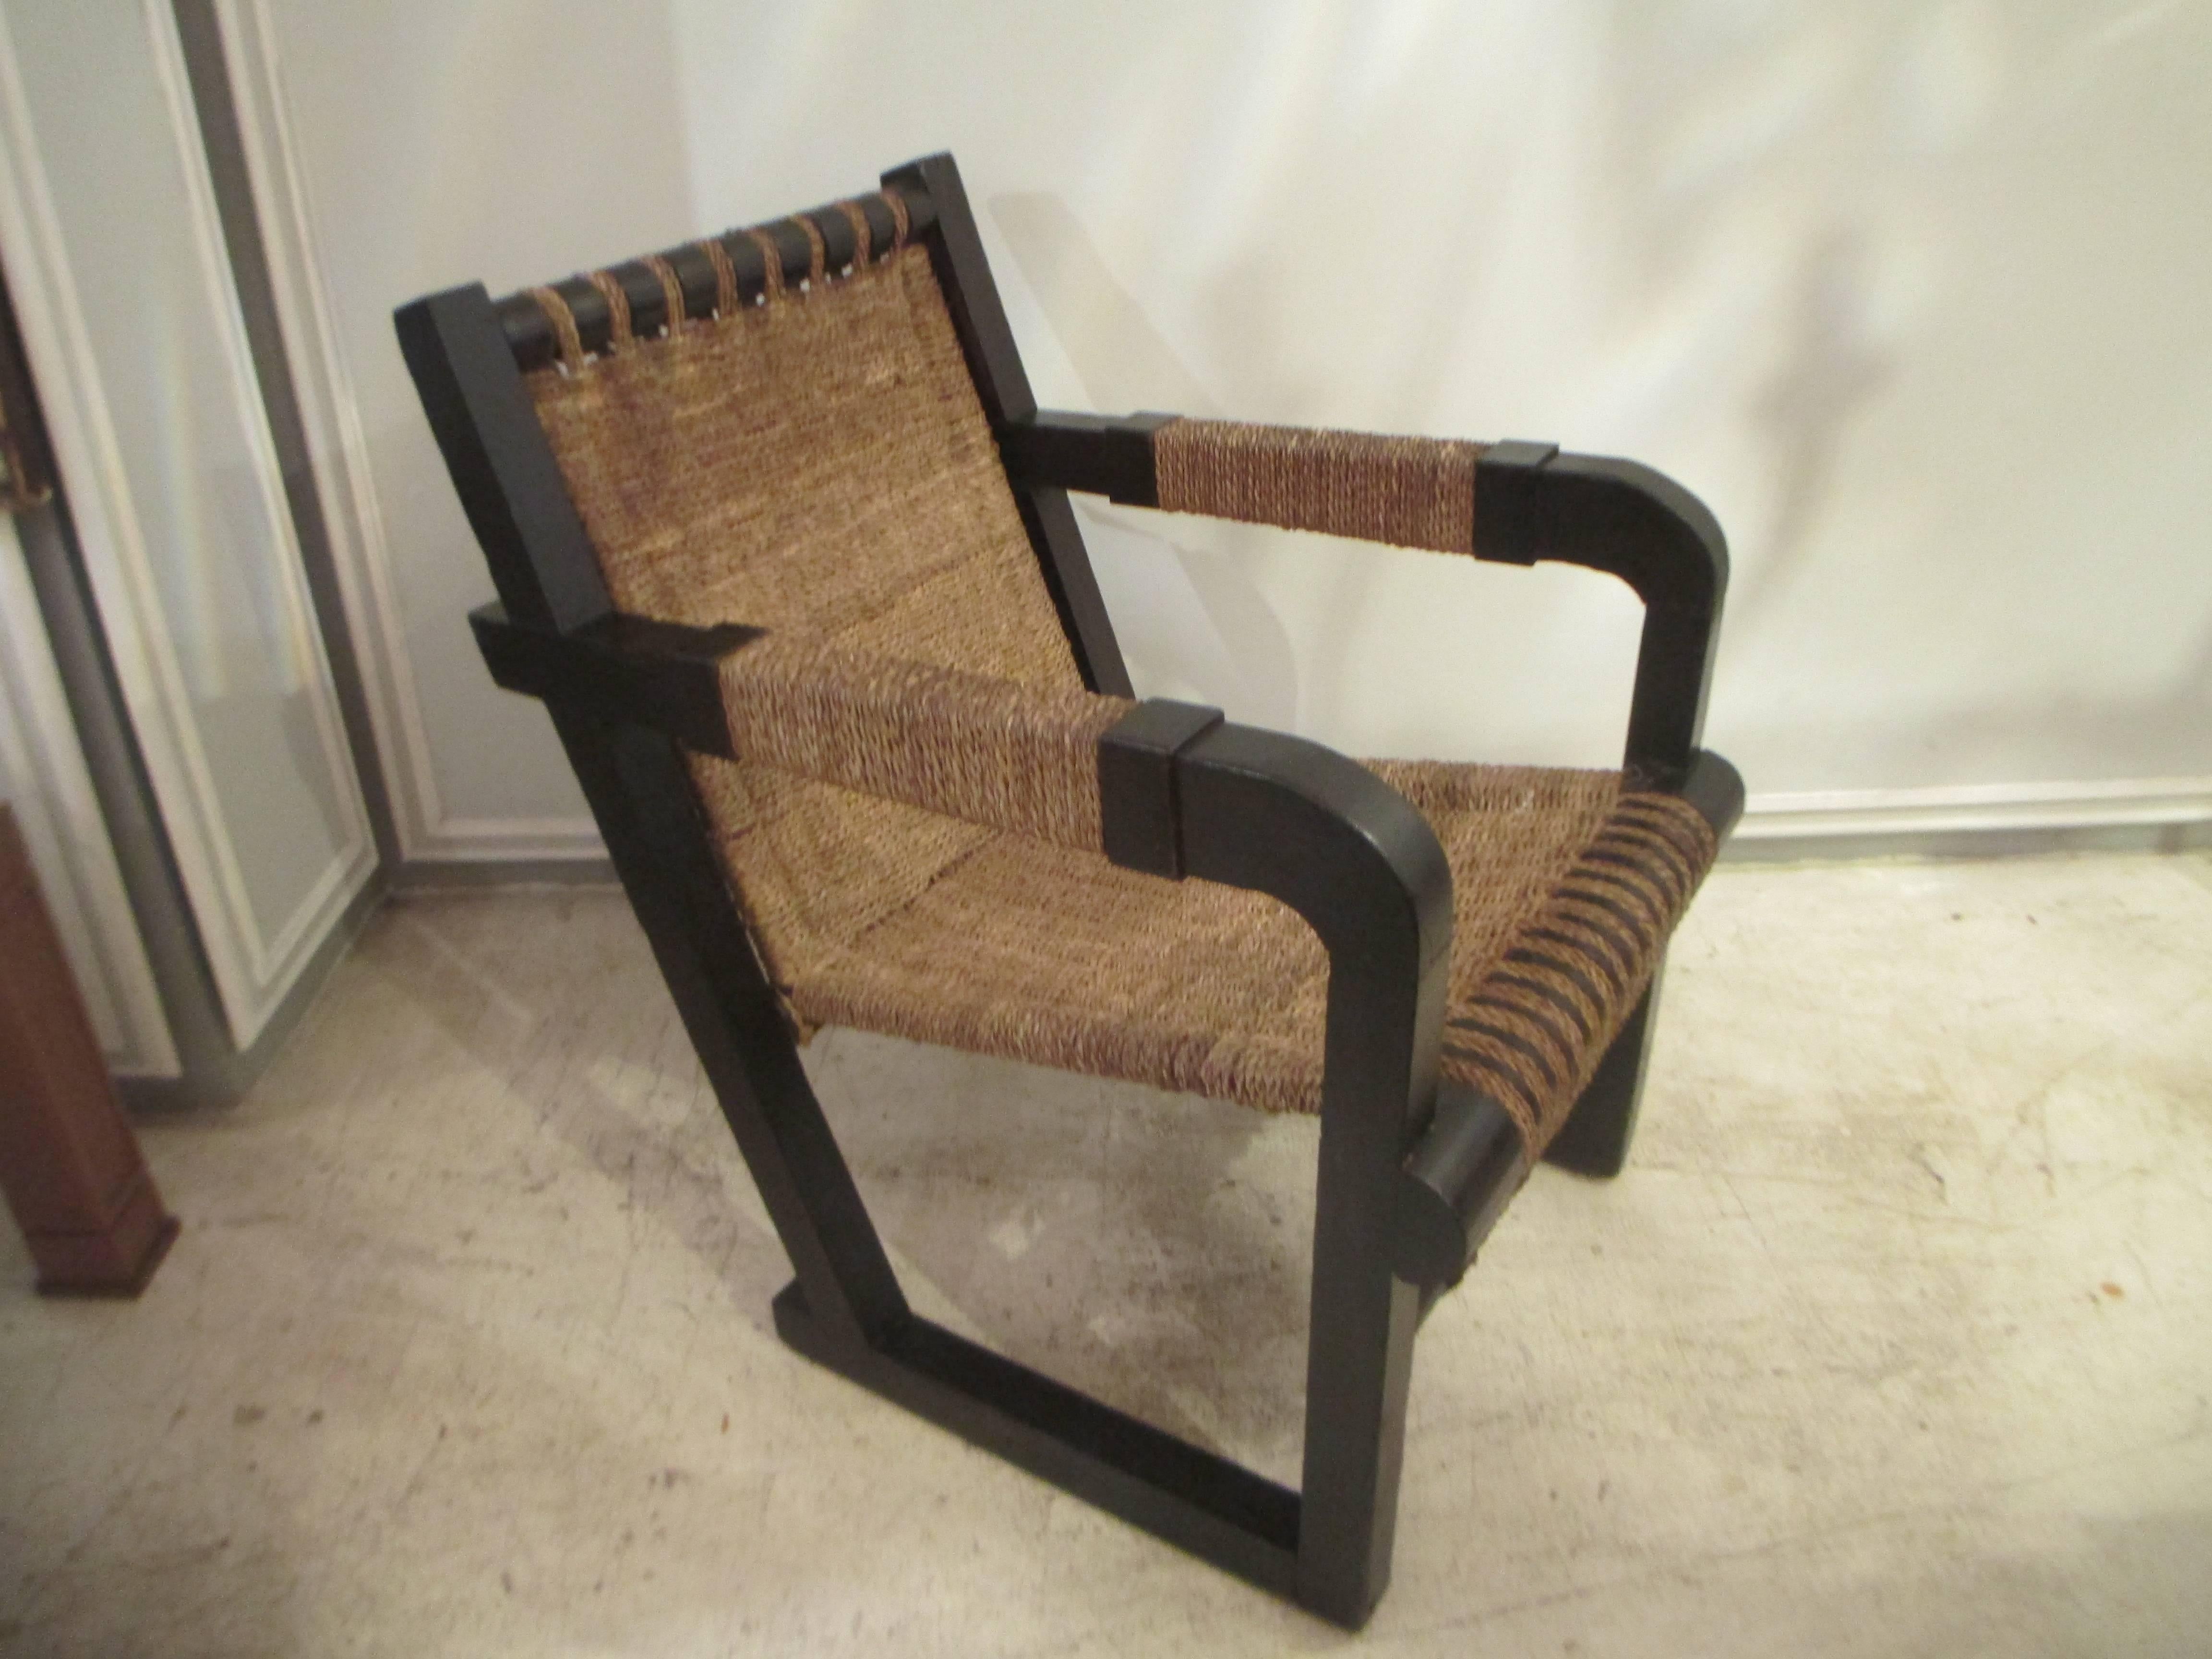 A pair of French 1920s caned lounge chairs. These chairs are extremely comfortable.